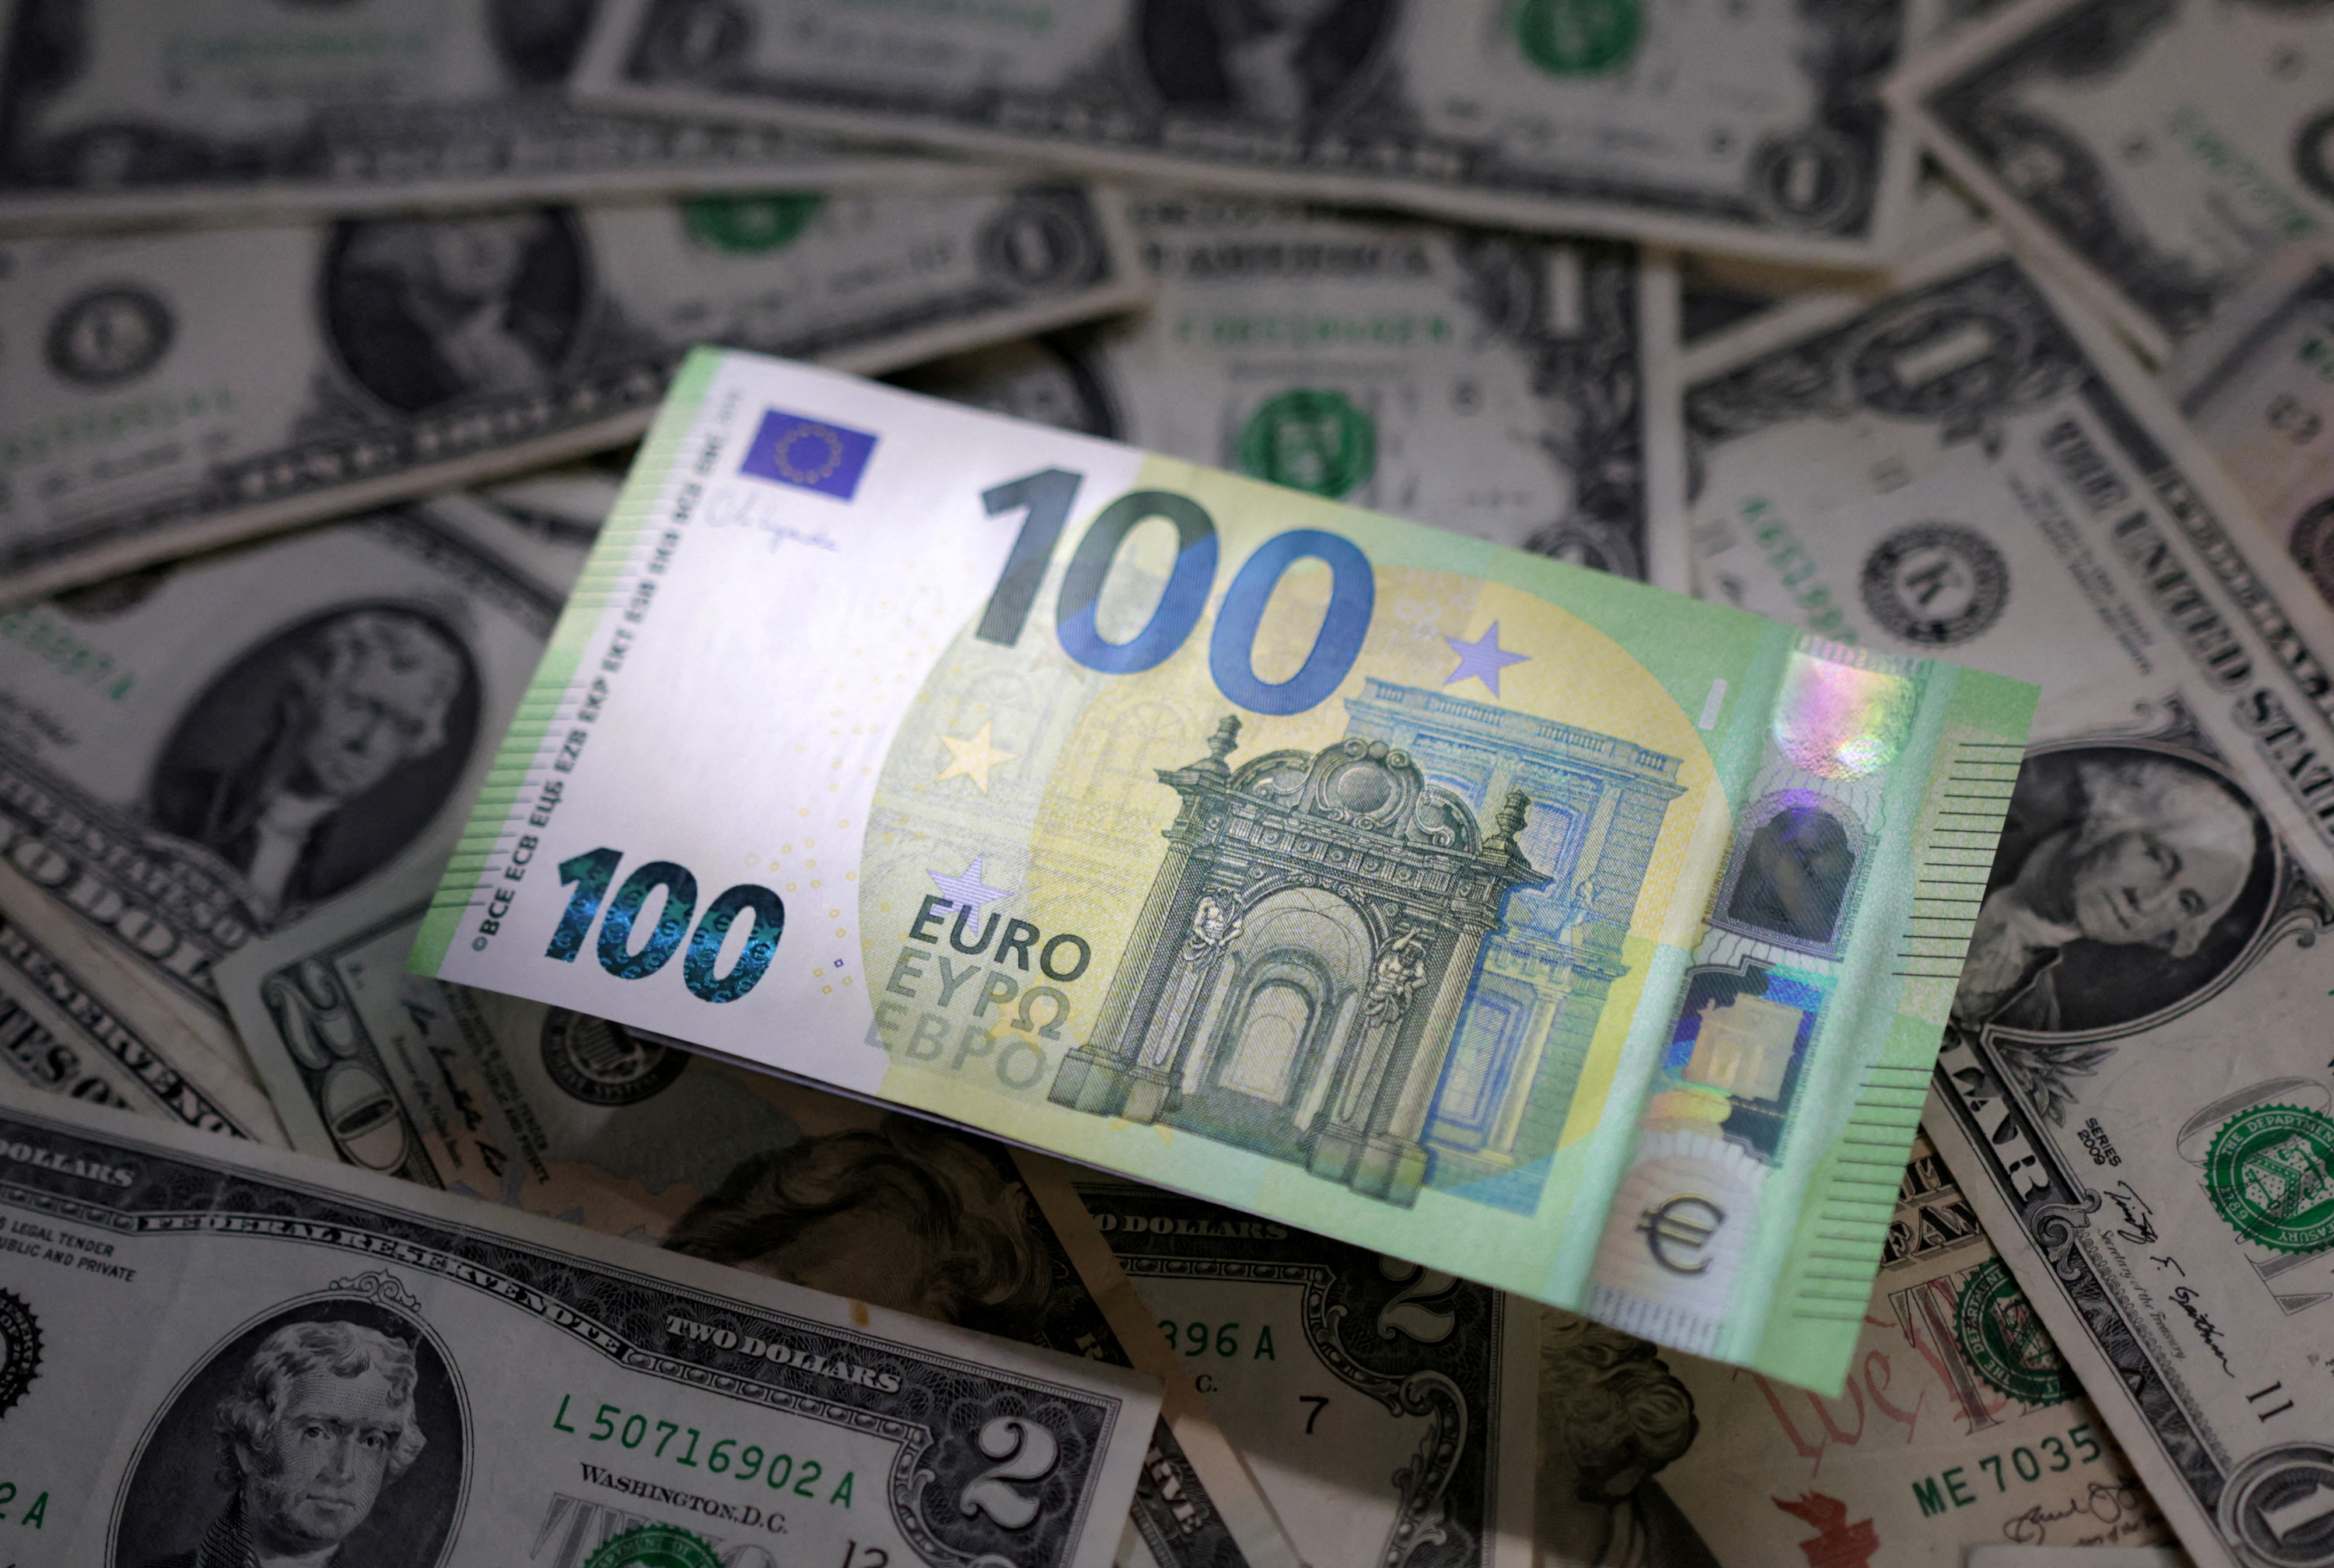 Here's a European stock that stands to benefit from strong U.S. dollar